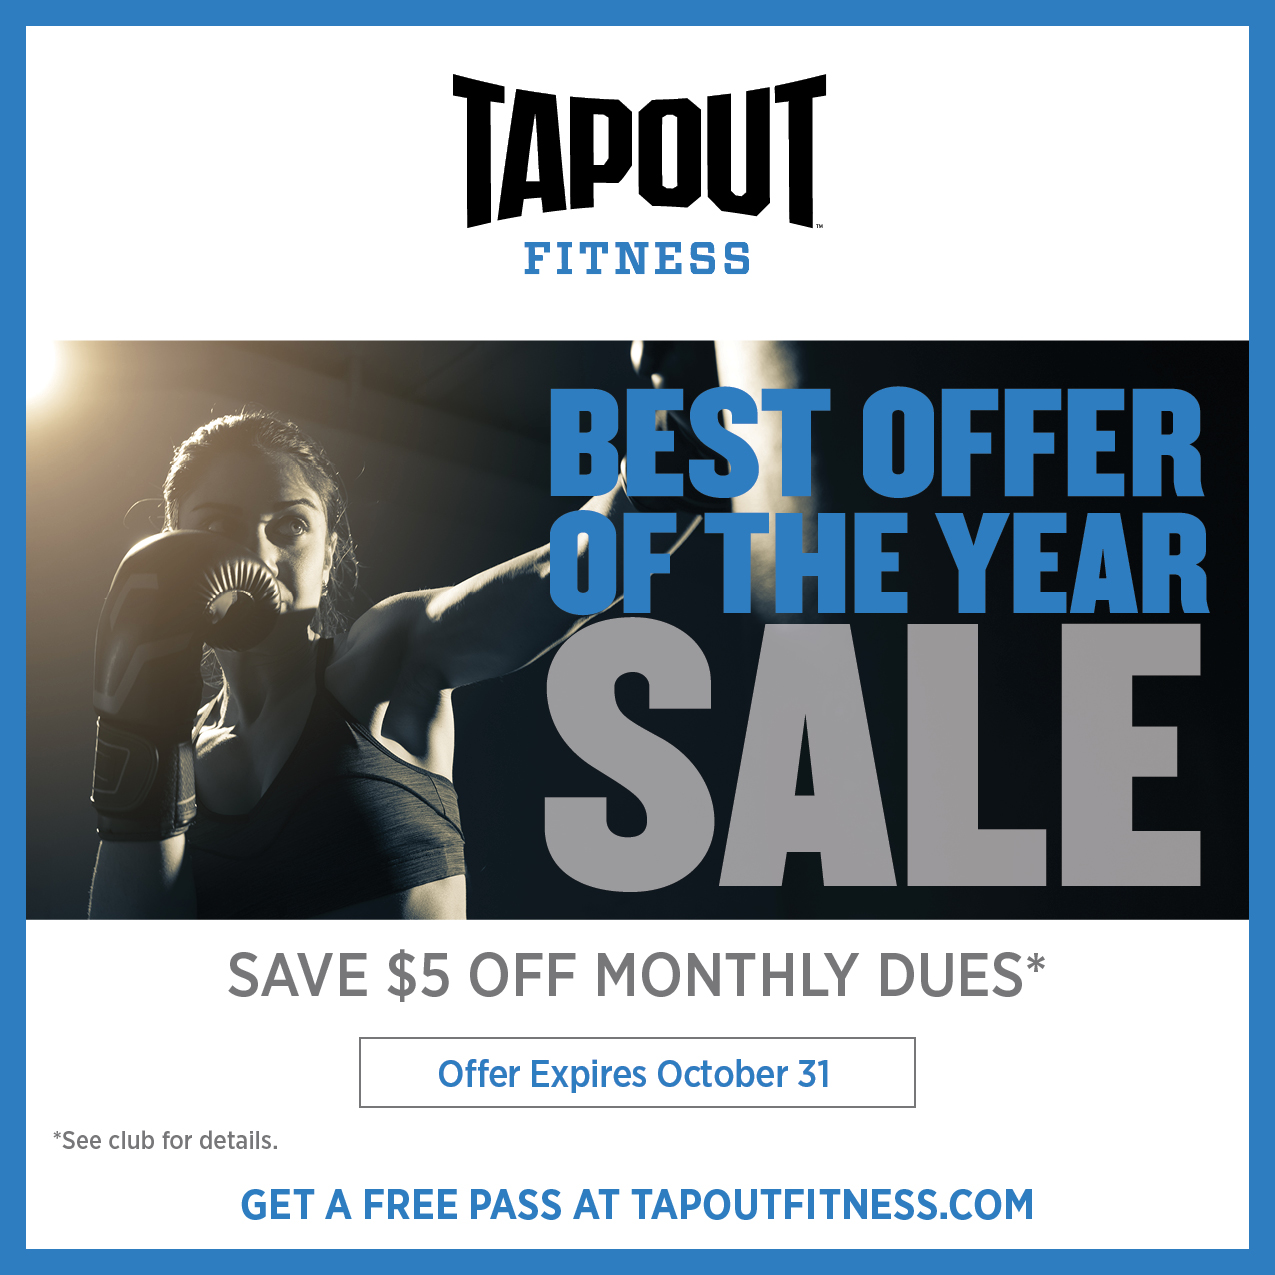 Tapout Fitness post